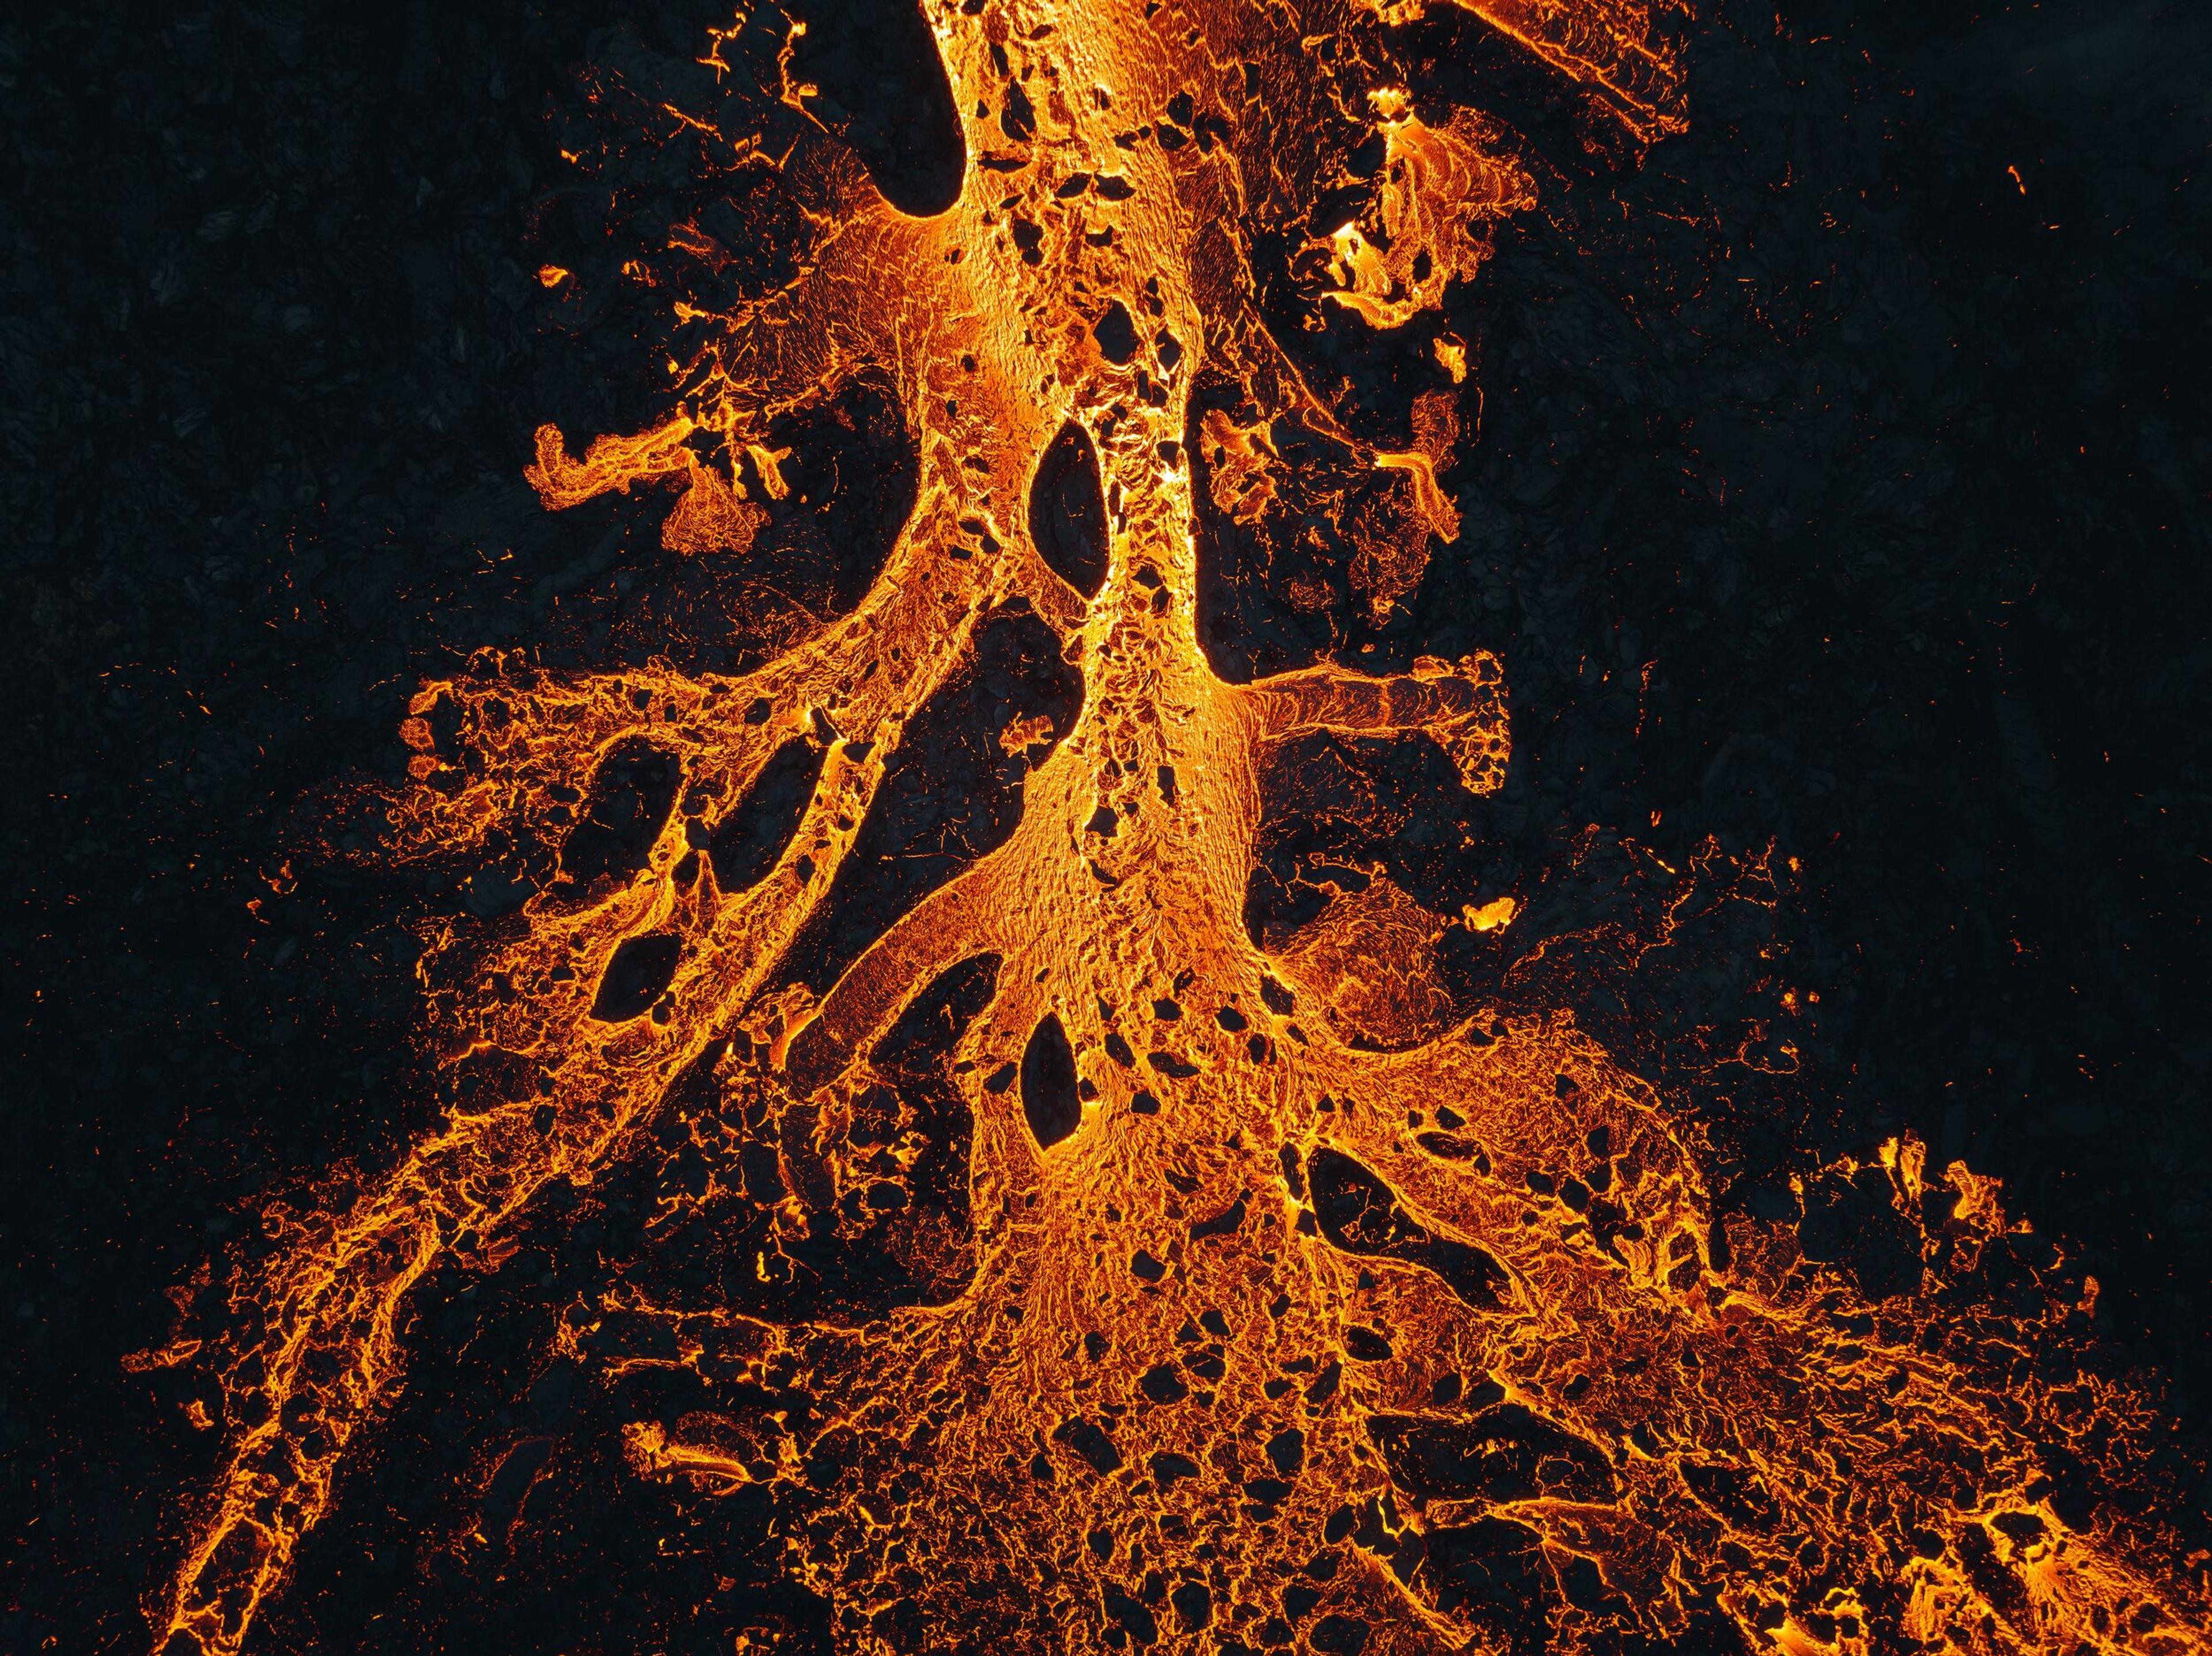 Close-up of molten lava streams with intricate patterns, glowing in vibrant orange against the dark.